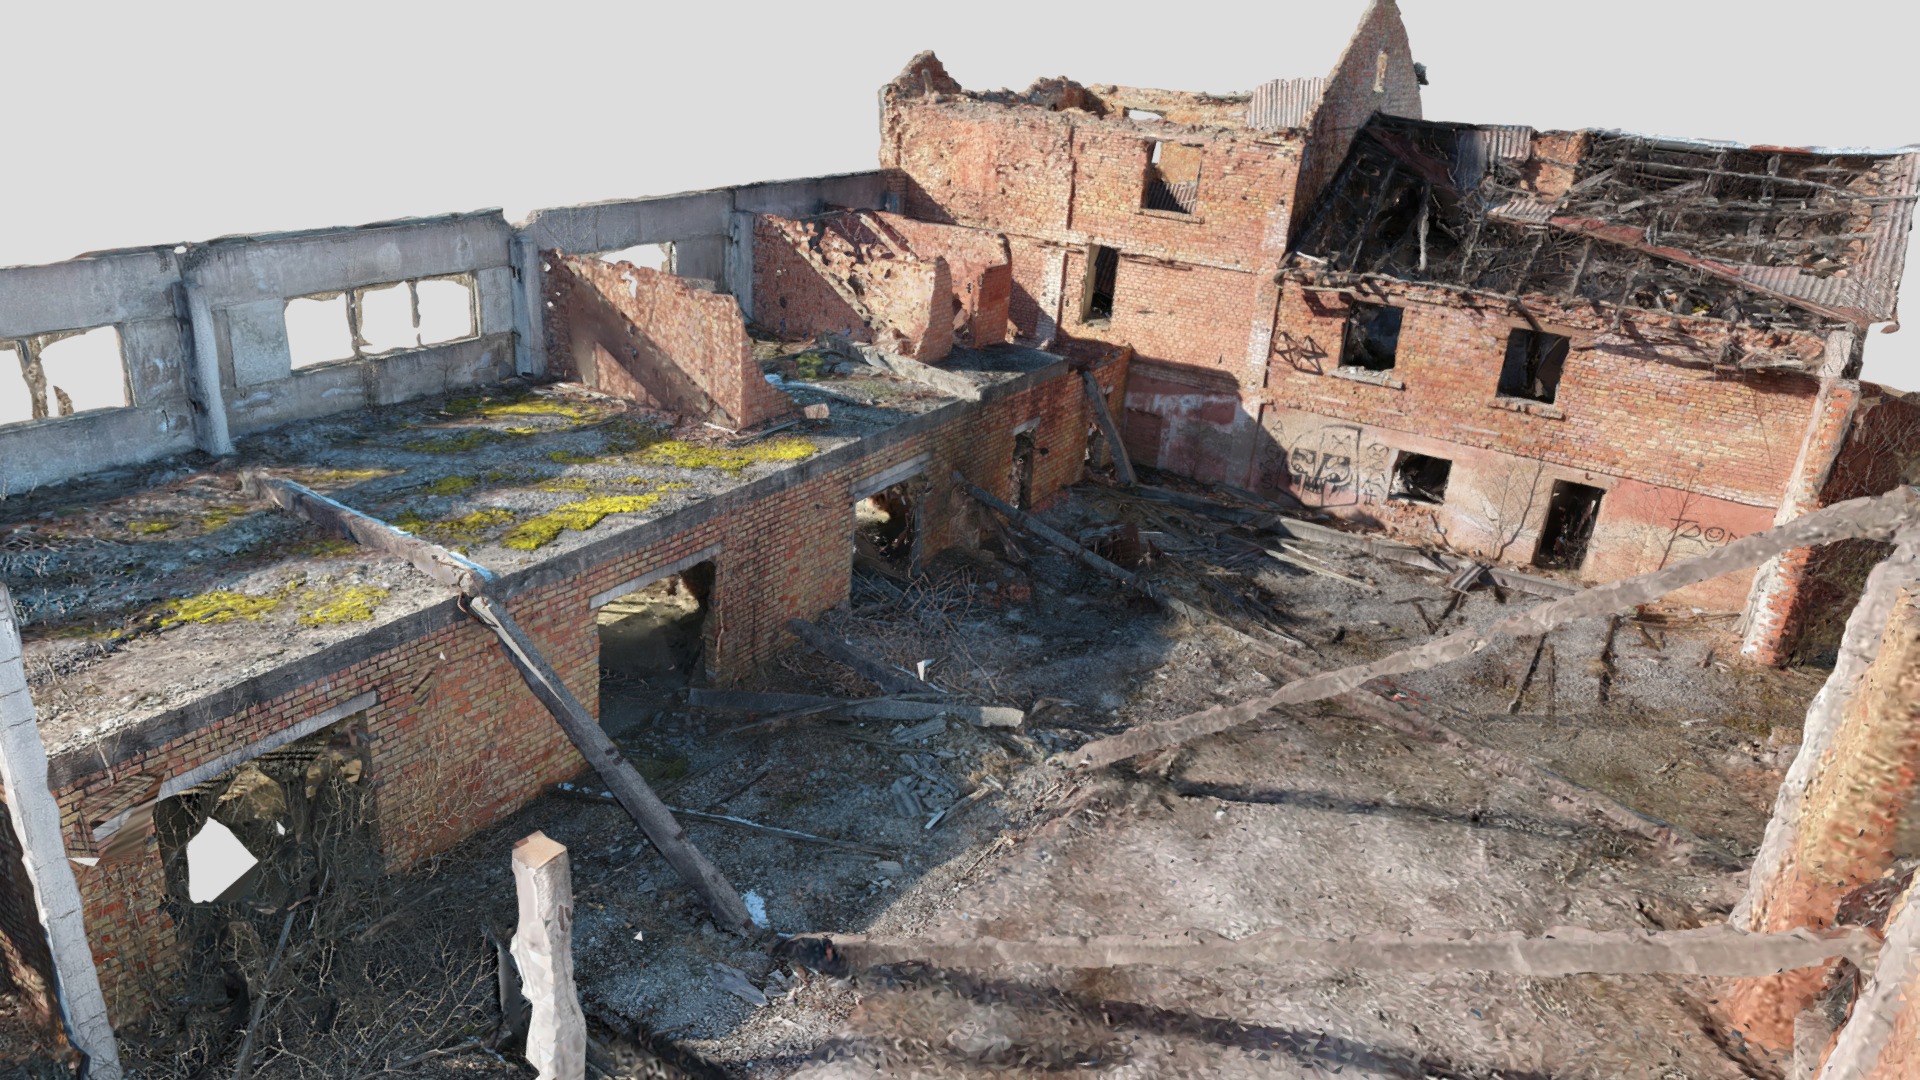 3D model Abandoned Ruins - This is a 3D model of the Abandoned Ruins. The 3D model is about a destroyed building with debris all over it.